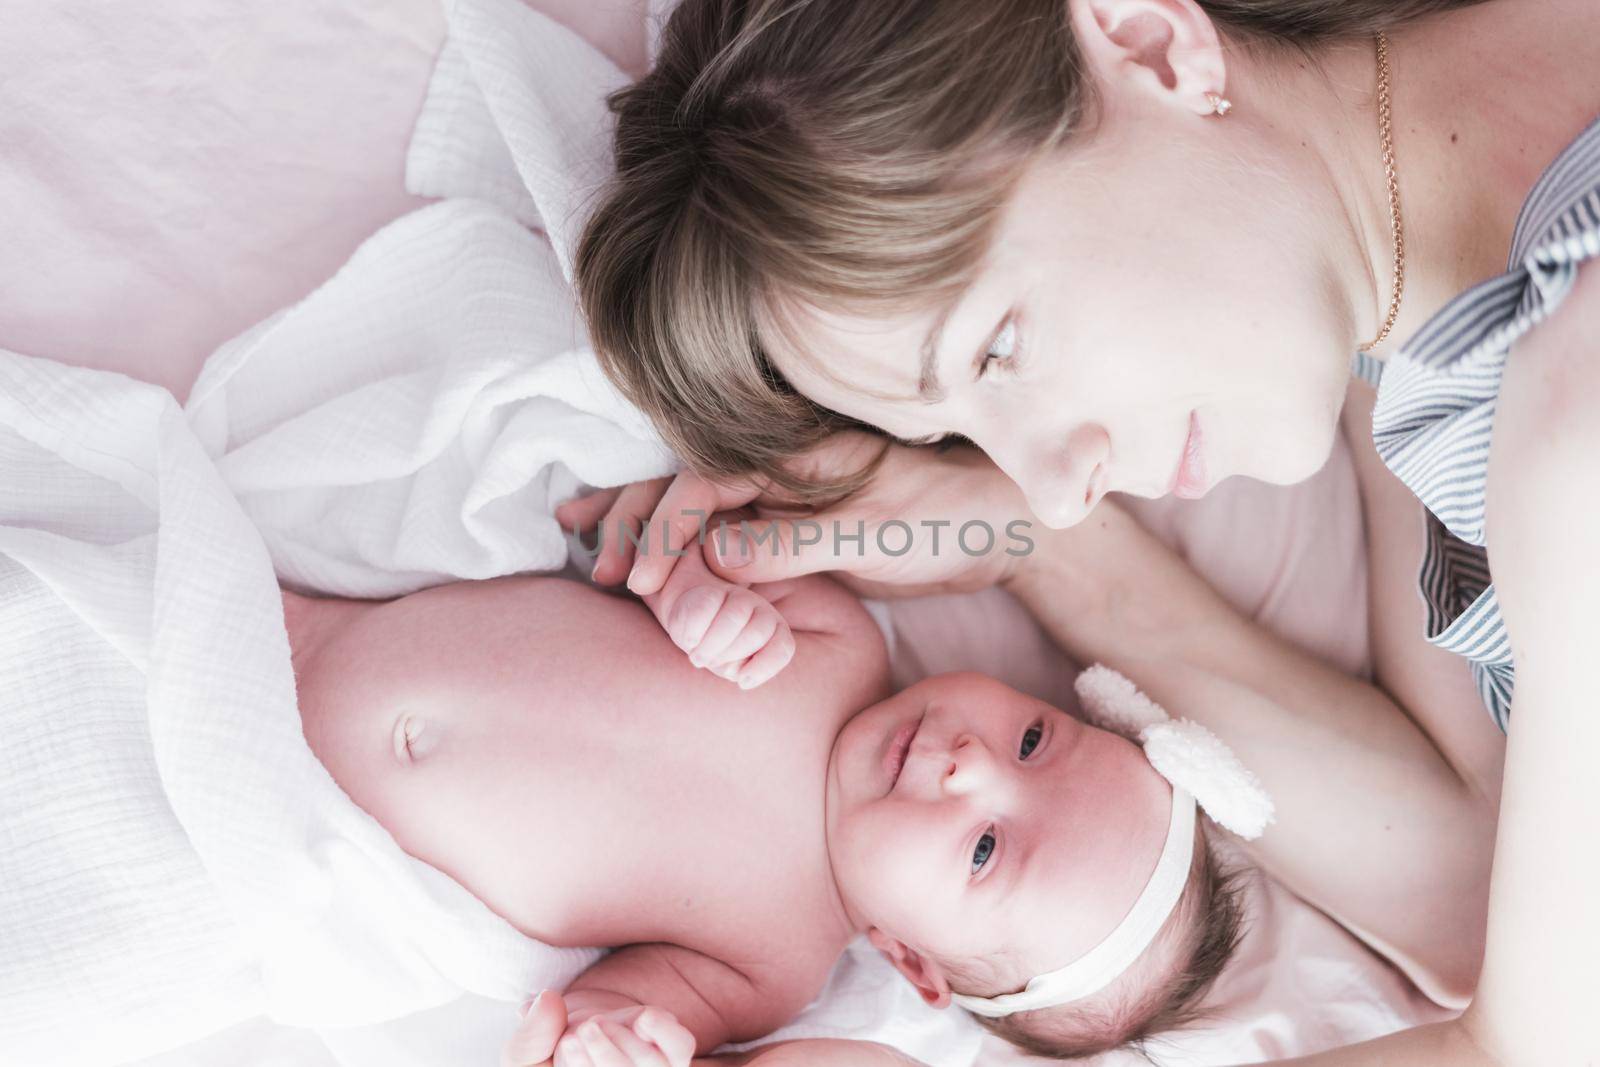 Lifestyle portrait of a young mother and her newborn, three weeks old daughter.